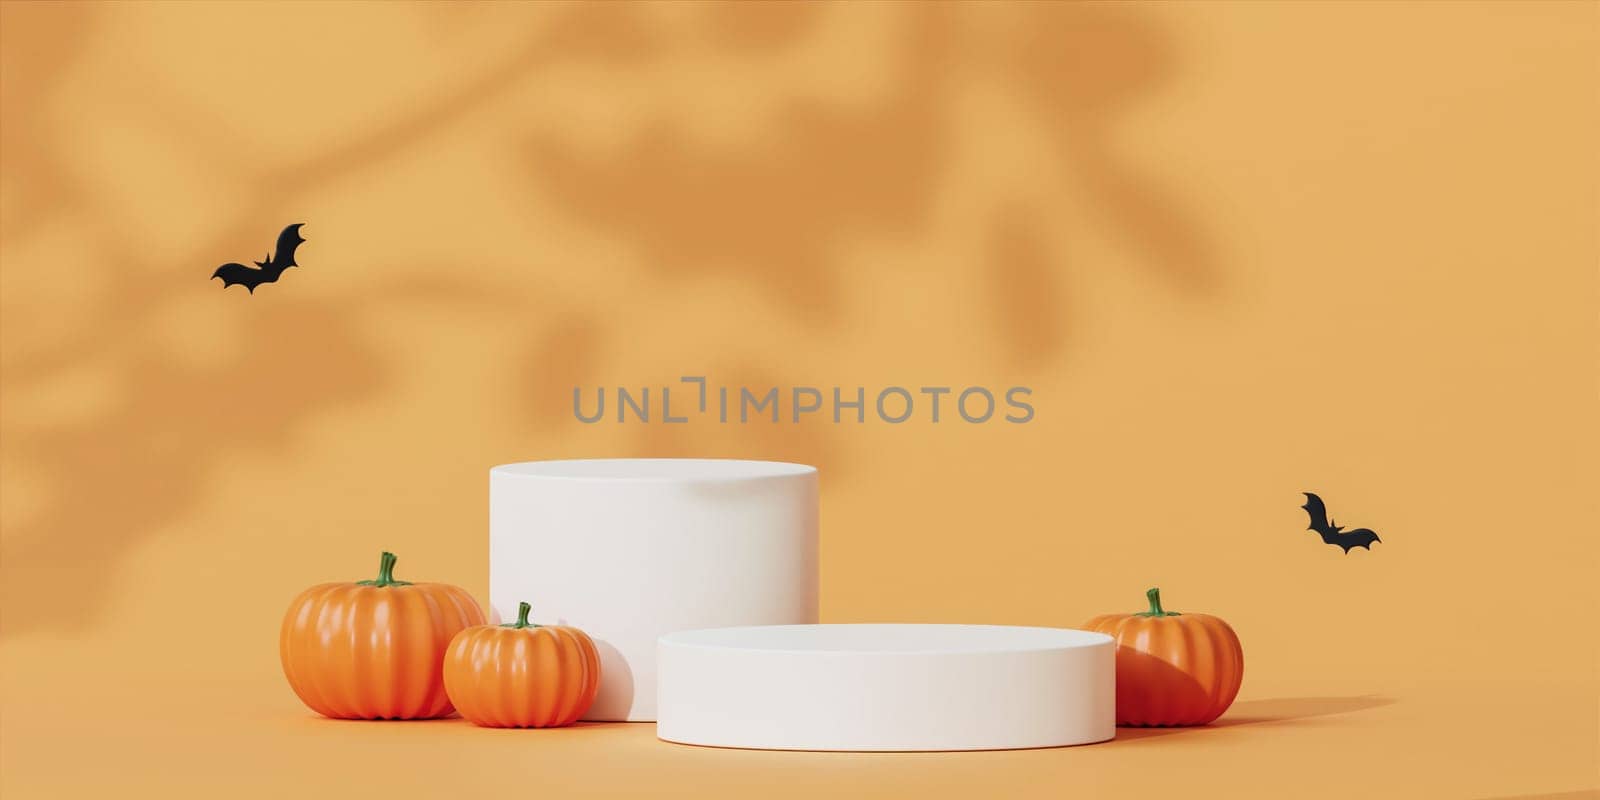 Podium or pedestal with pumpkins and bat for products display or advertising for Halloween, 3d render by meepiangraphic